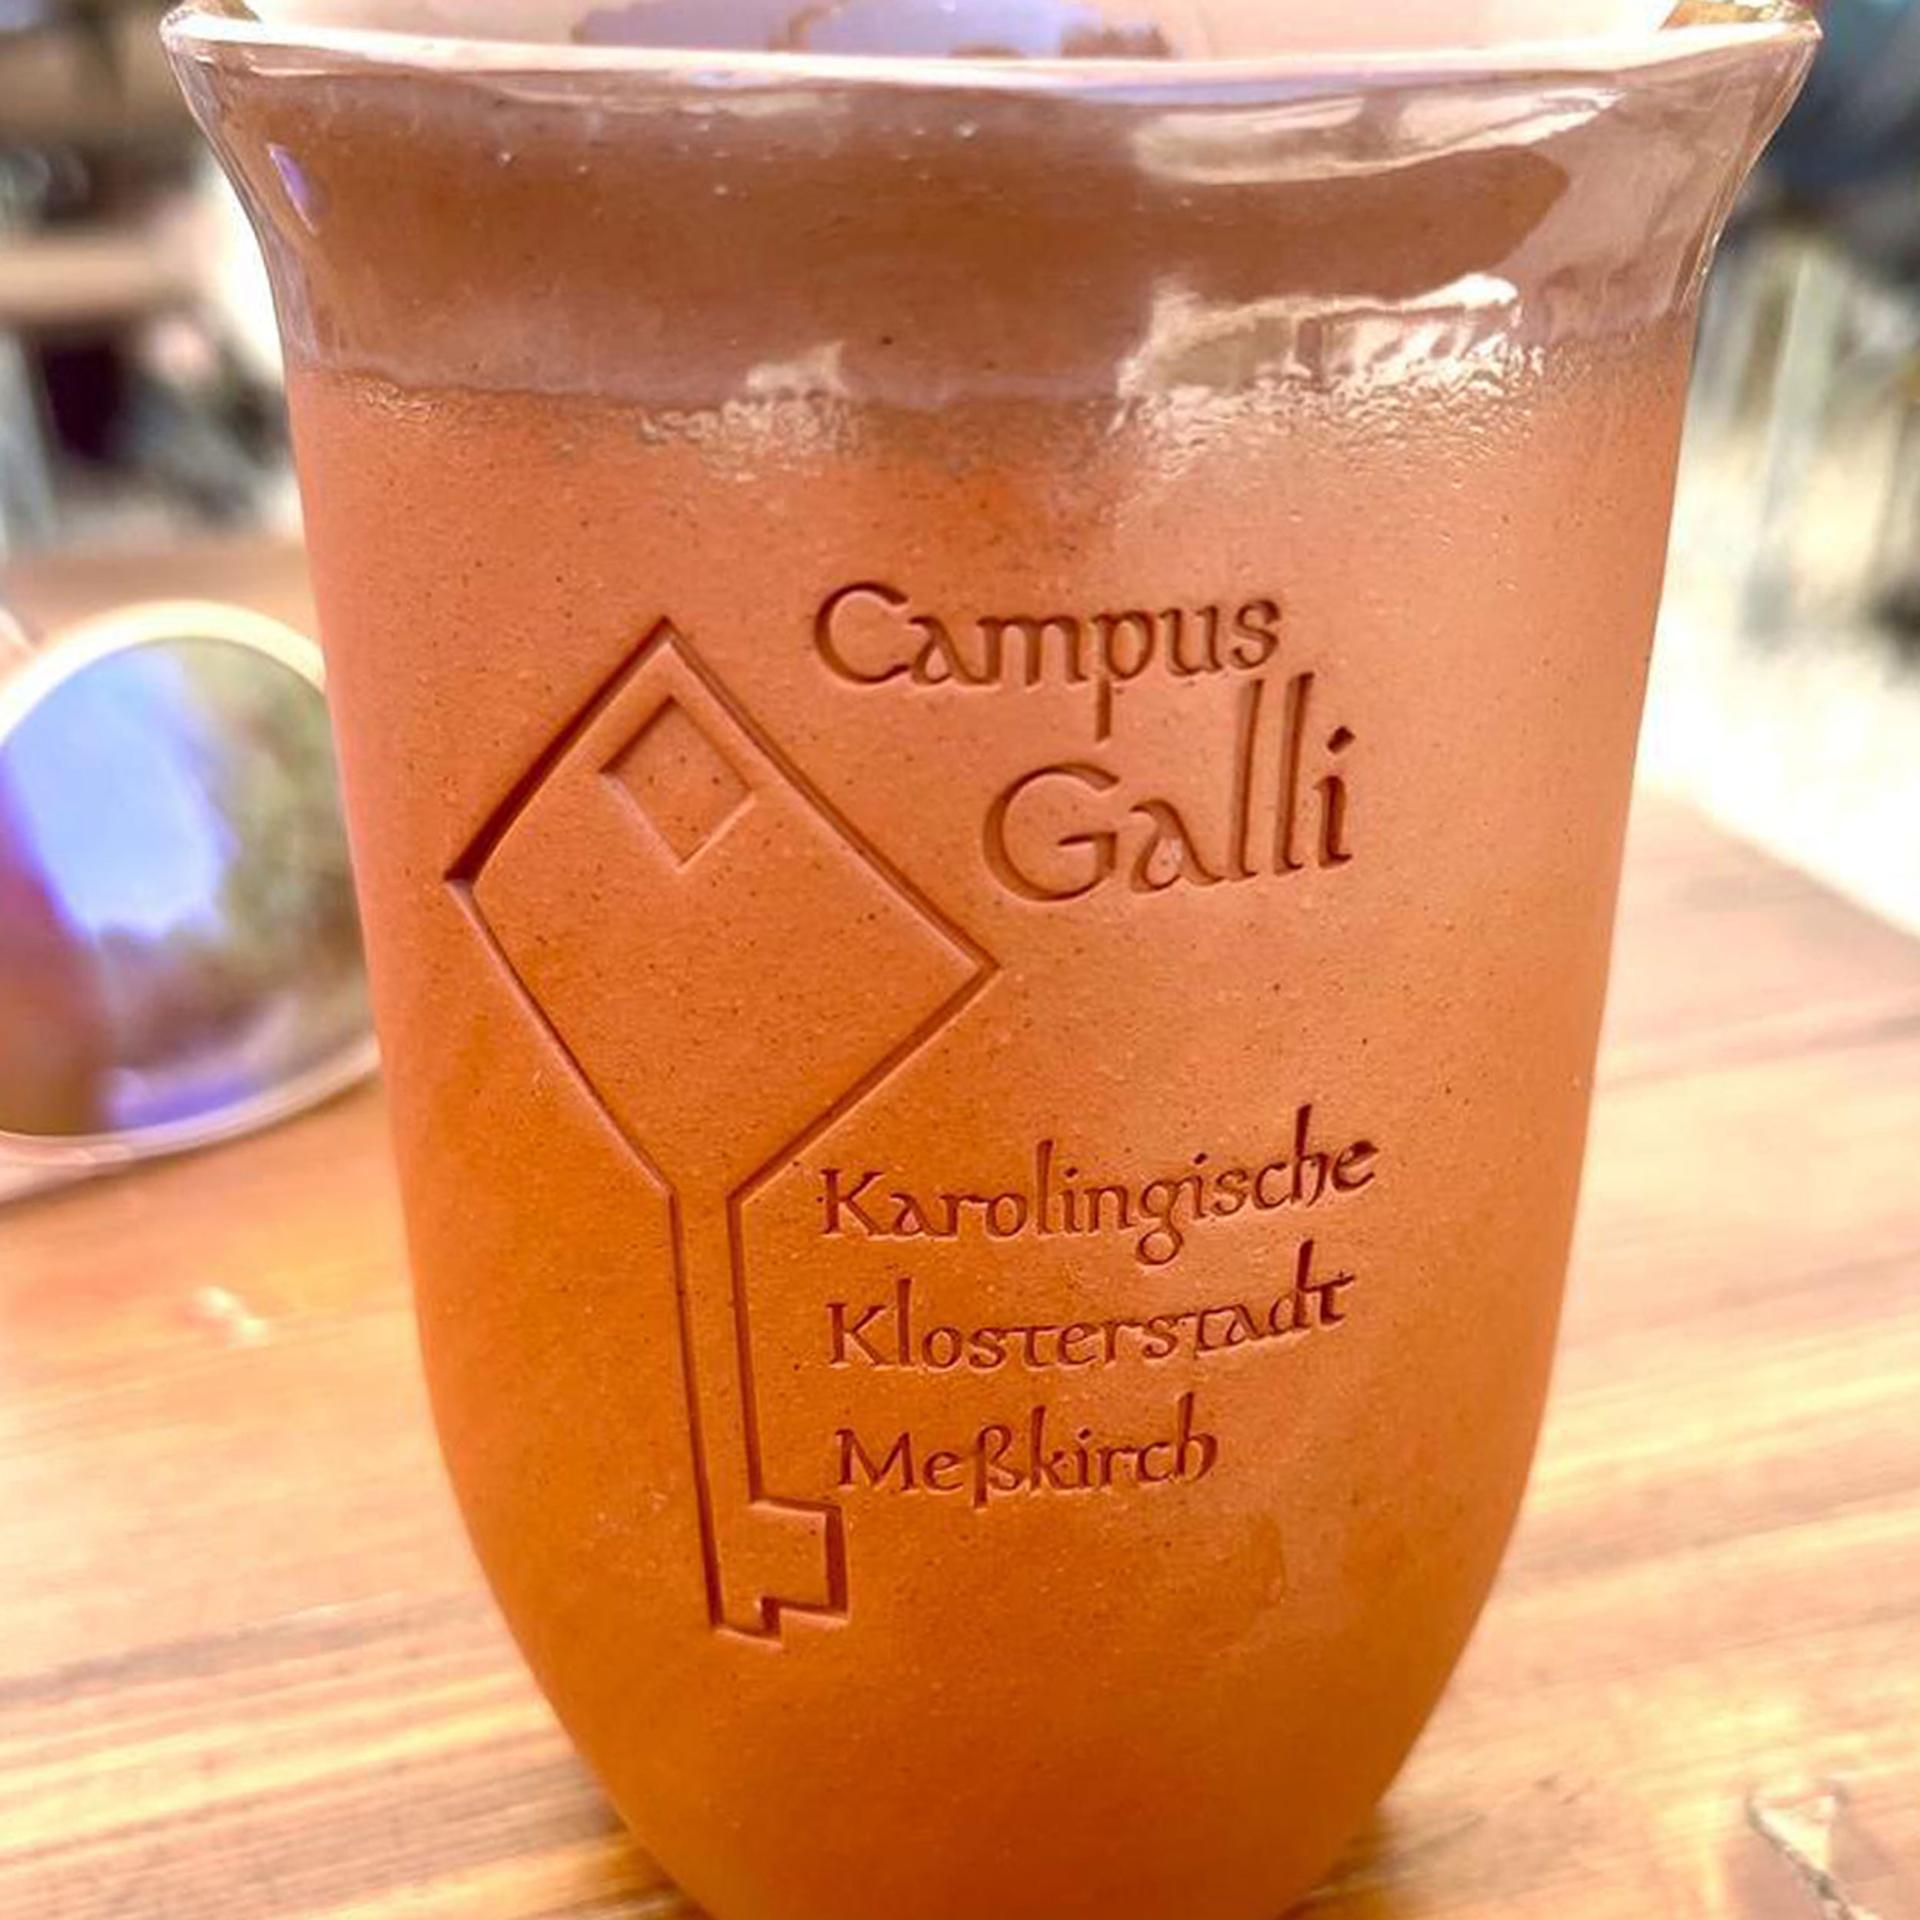 A cup representing the Benedictine cloister being built at Campus Galli in Southern Germany.